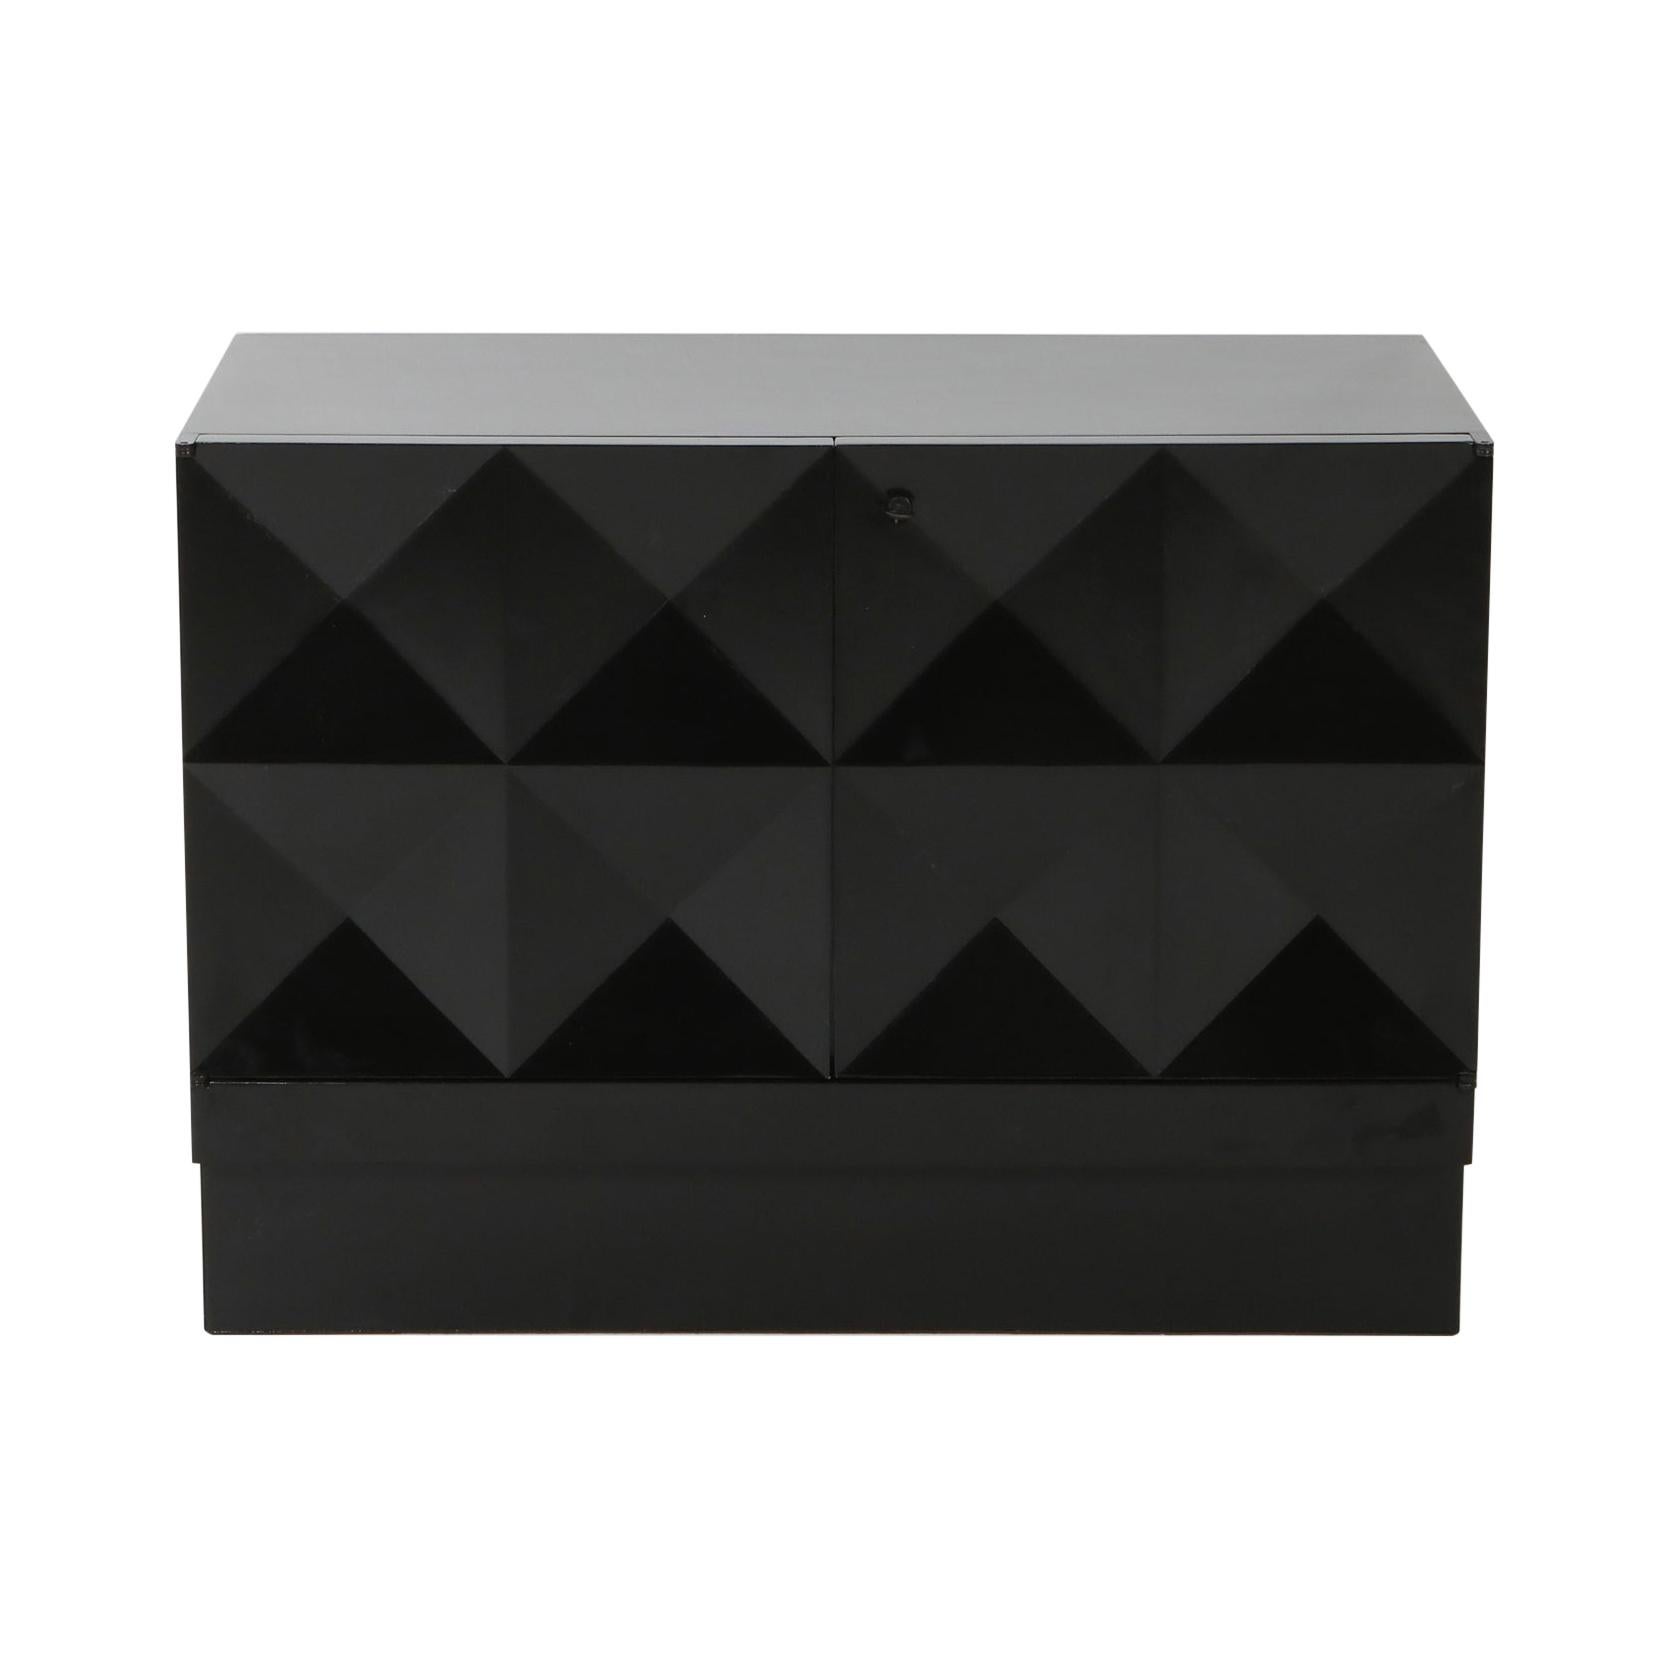 Brutalist Cabinet in Black Lacquer with Graphic Door Panels